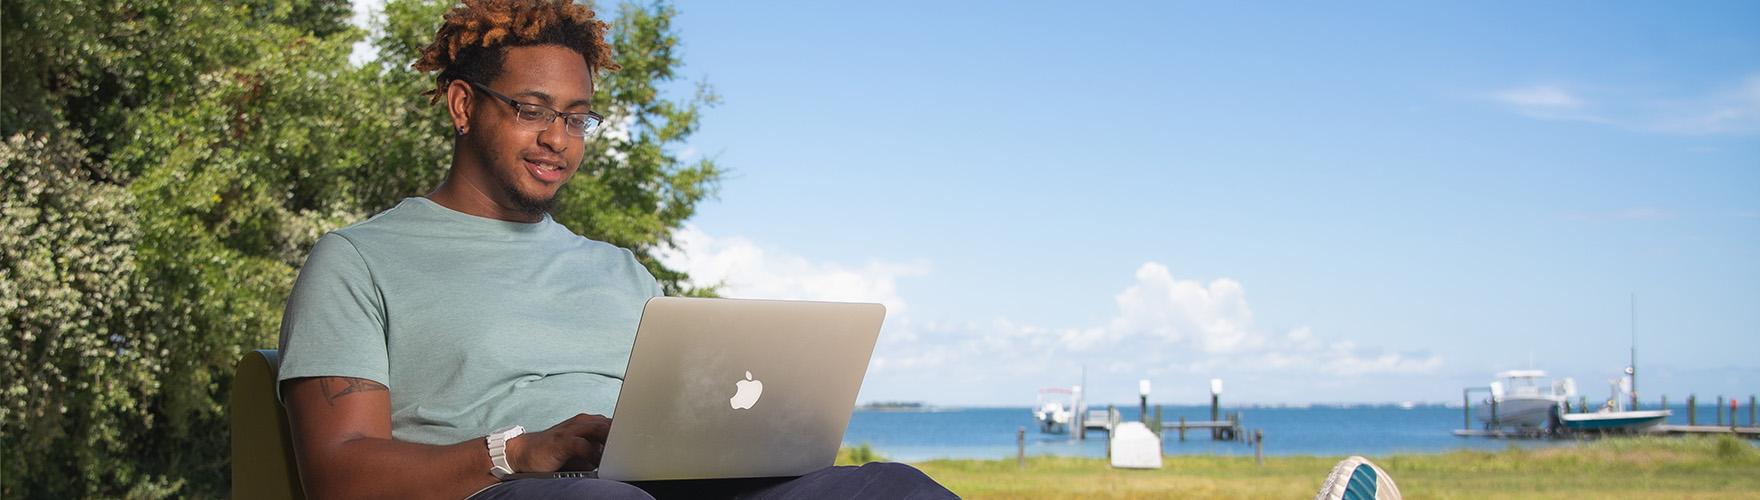 A student uses a laptop in a backyard by the water.